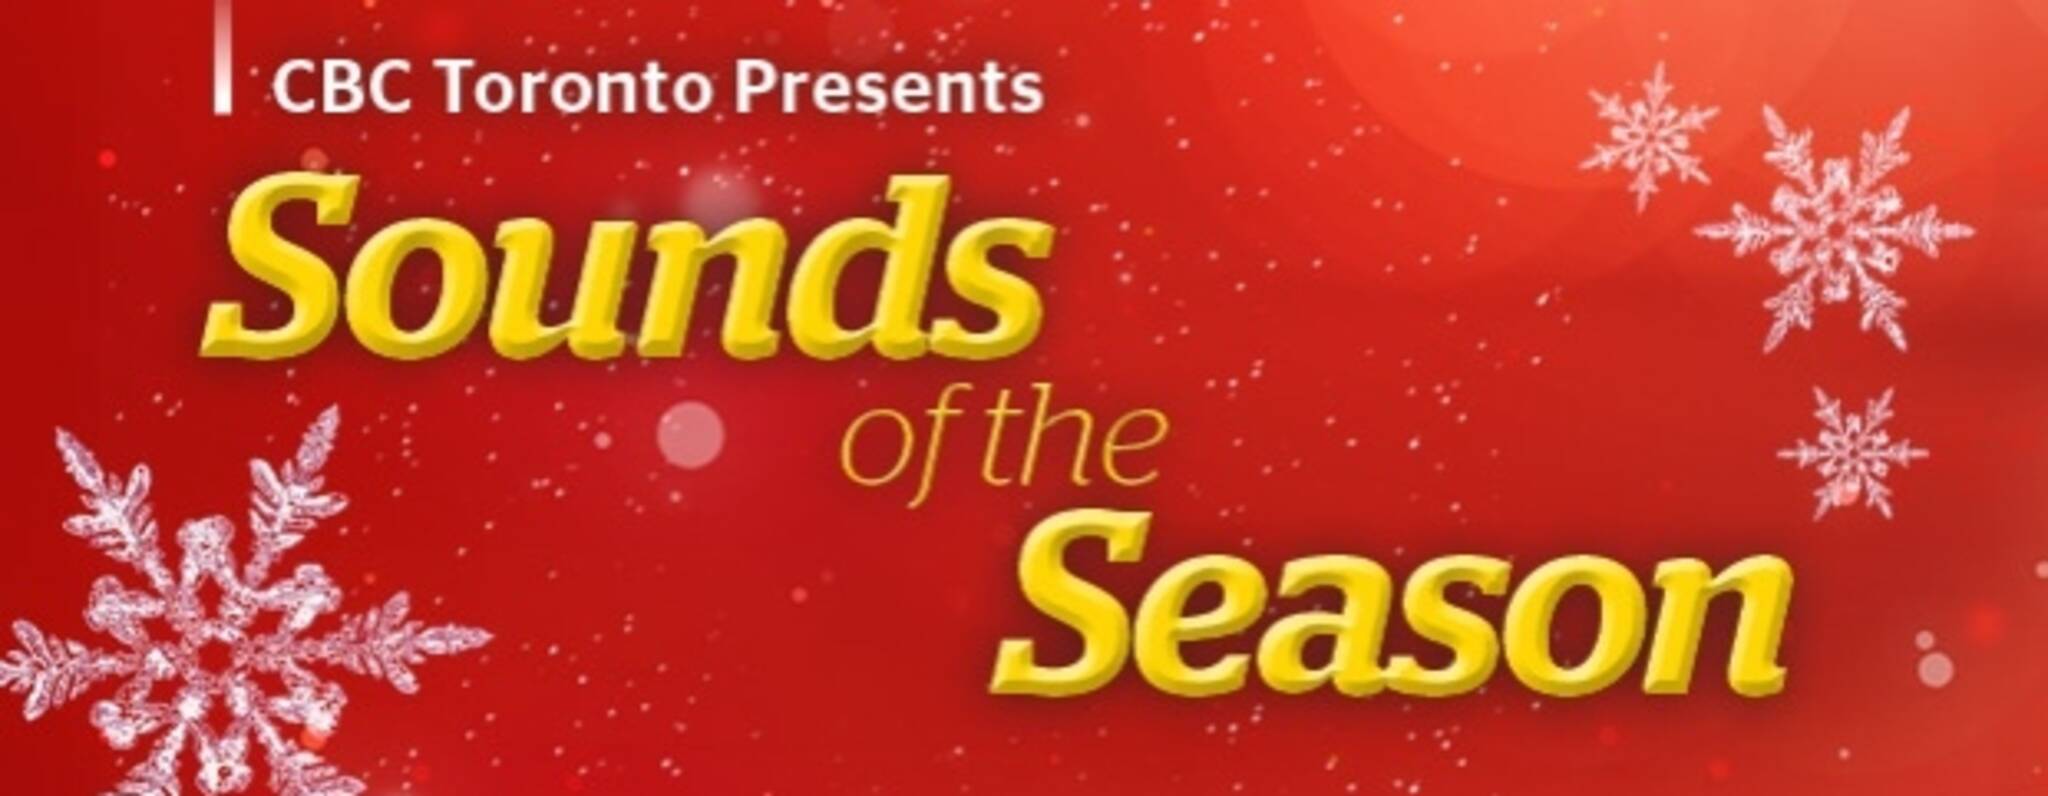 Sounds of the Season, presented by CBC Toronto